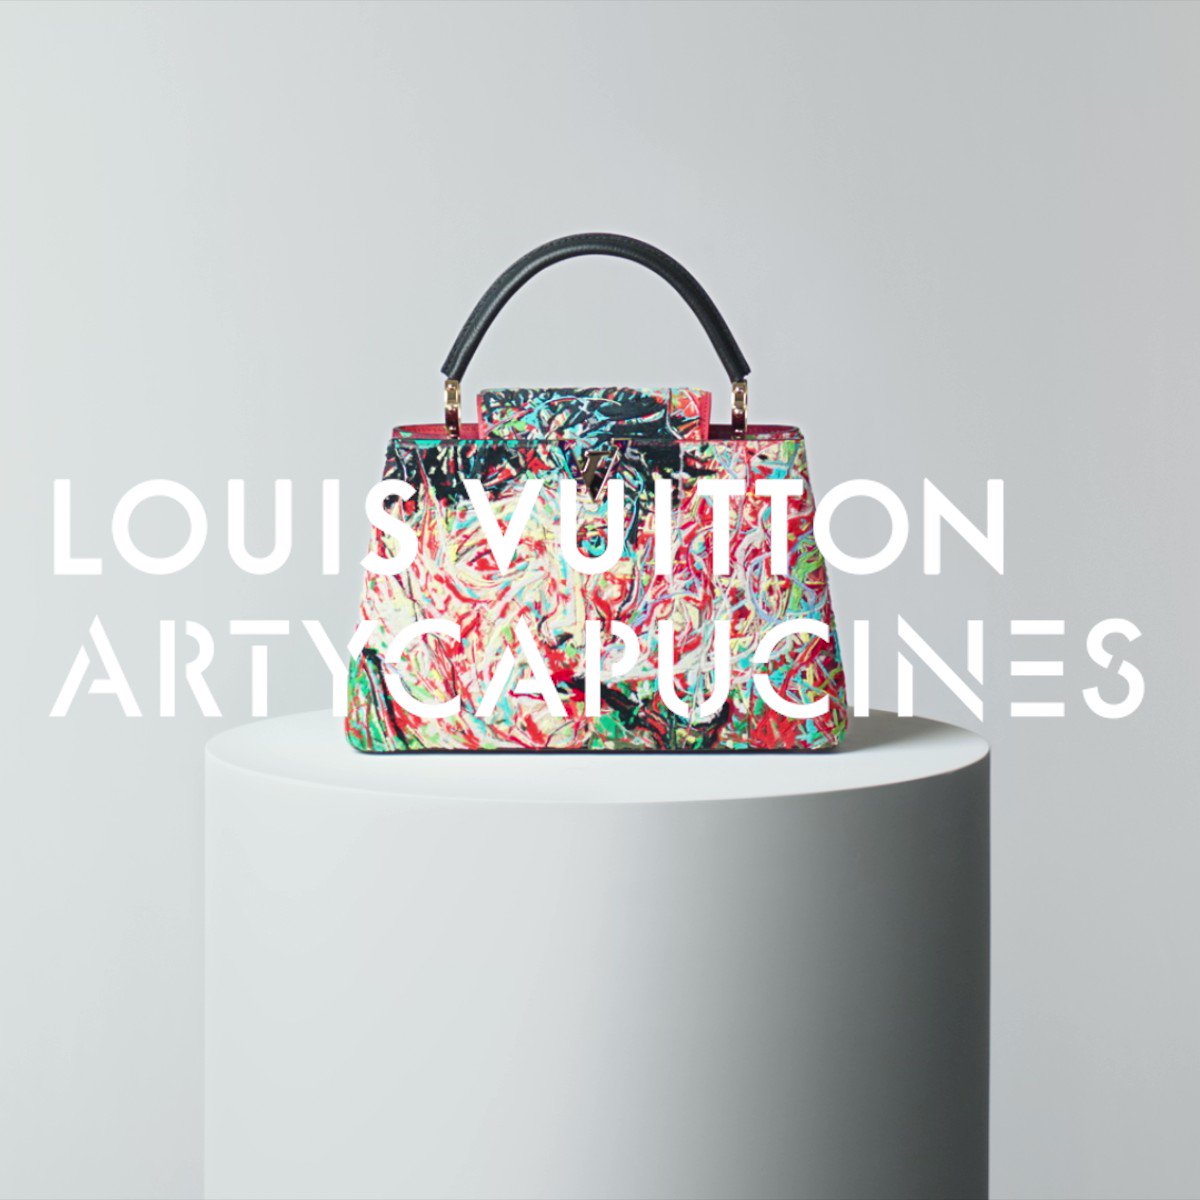 Louis Vuitton on X: Artycapucines Auction. Combining modern